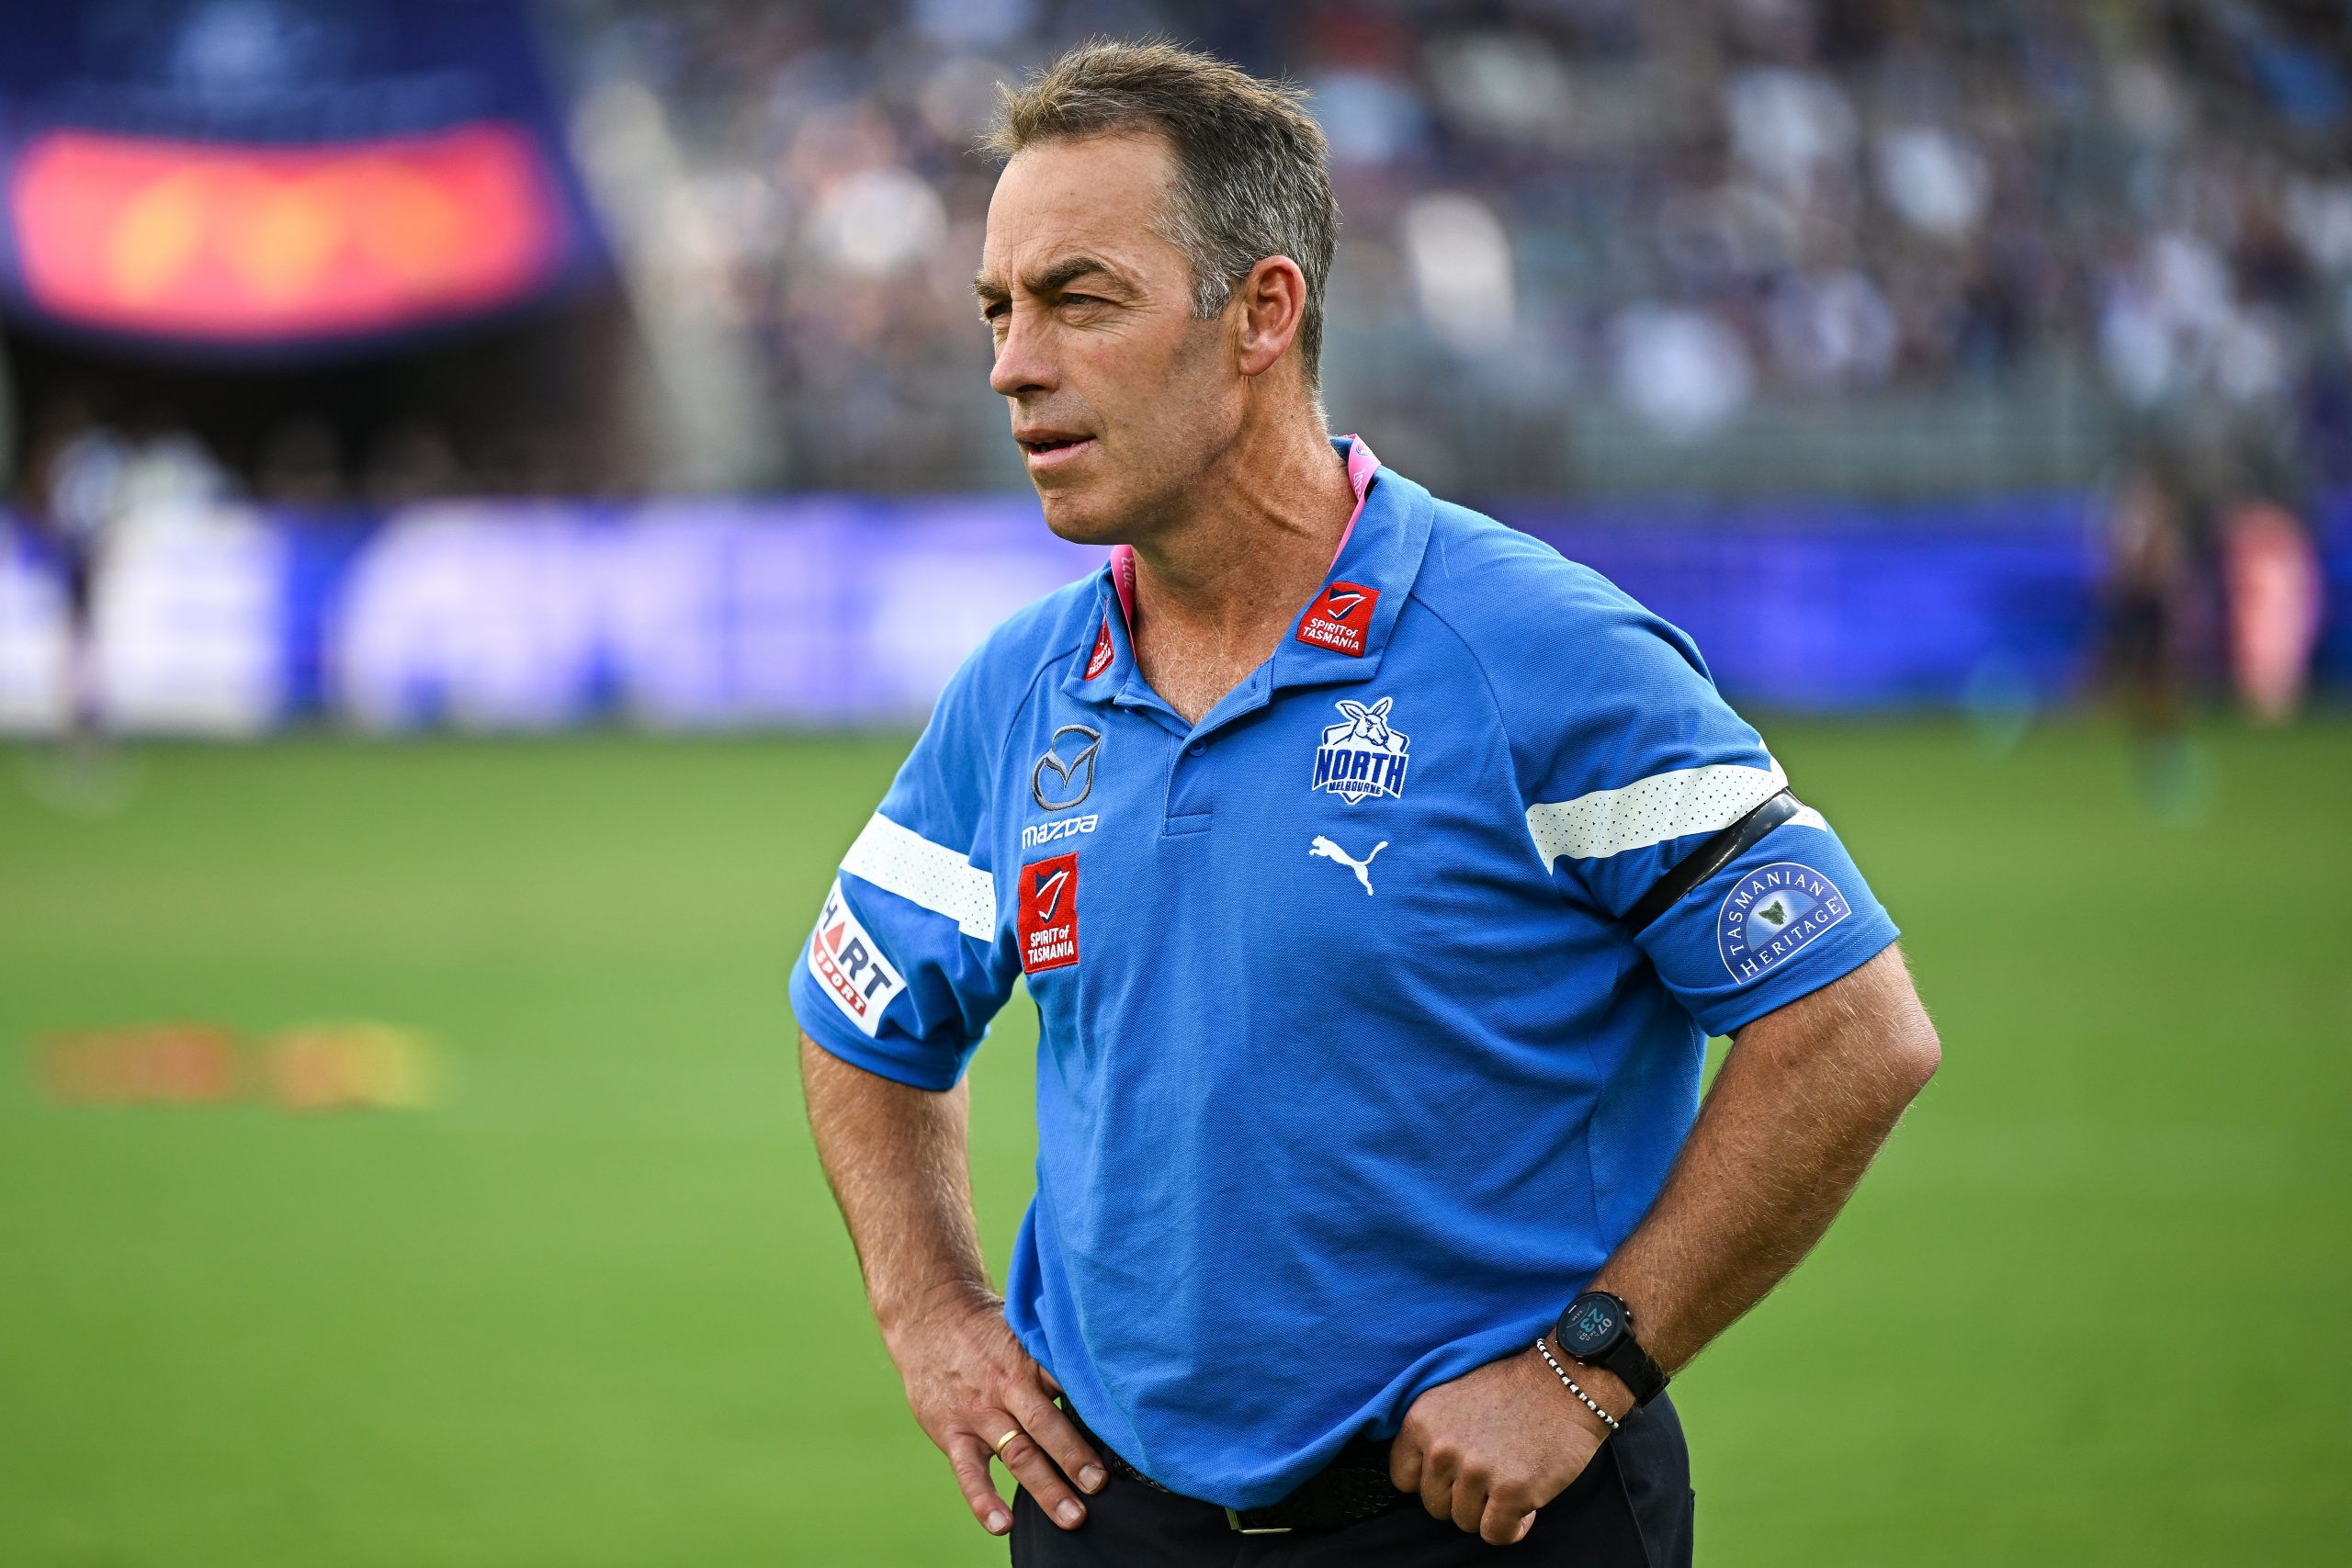 PERTH, AUSTRALIA - MARCH 25: Alastair Clarkson, Senior Coach of the Kangaroos looks on during the 2023 AFL Round 02 match between the Fremantle Dockers and the North Melbourne Kangaroos at Optus Stadium on March 25, 2023 in Perth, Australia. (Photo by Daniel Carson/AFL Photos)